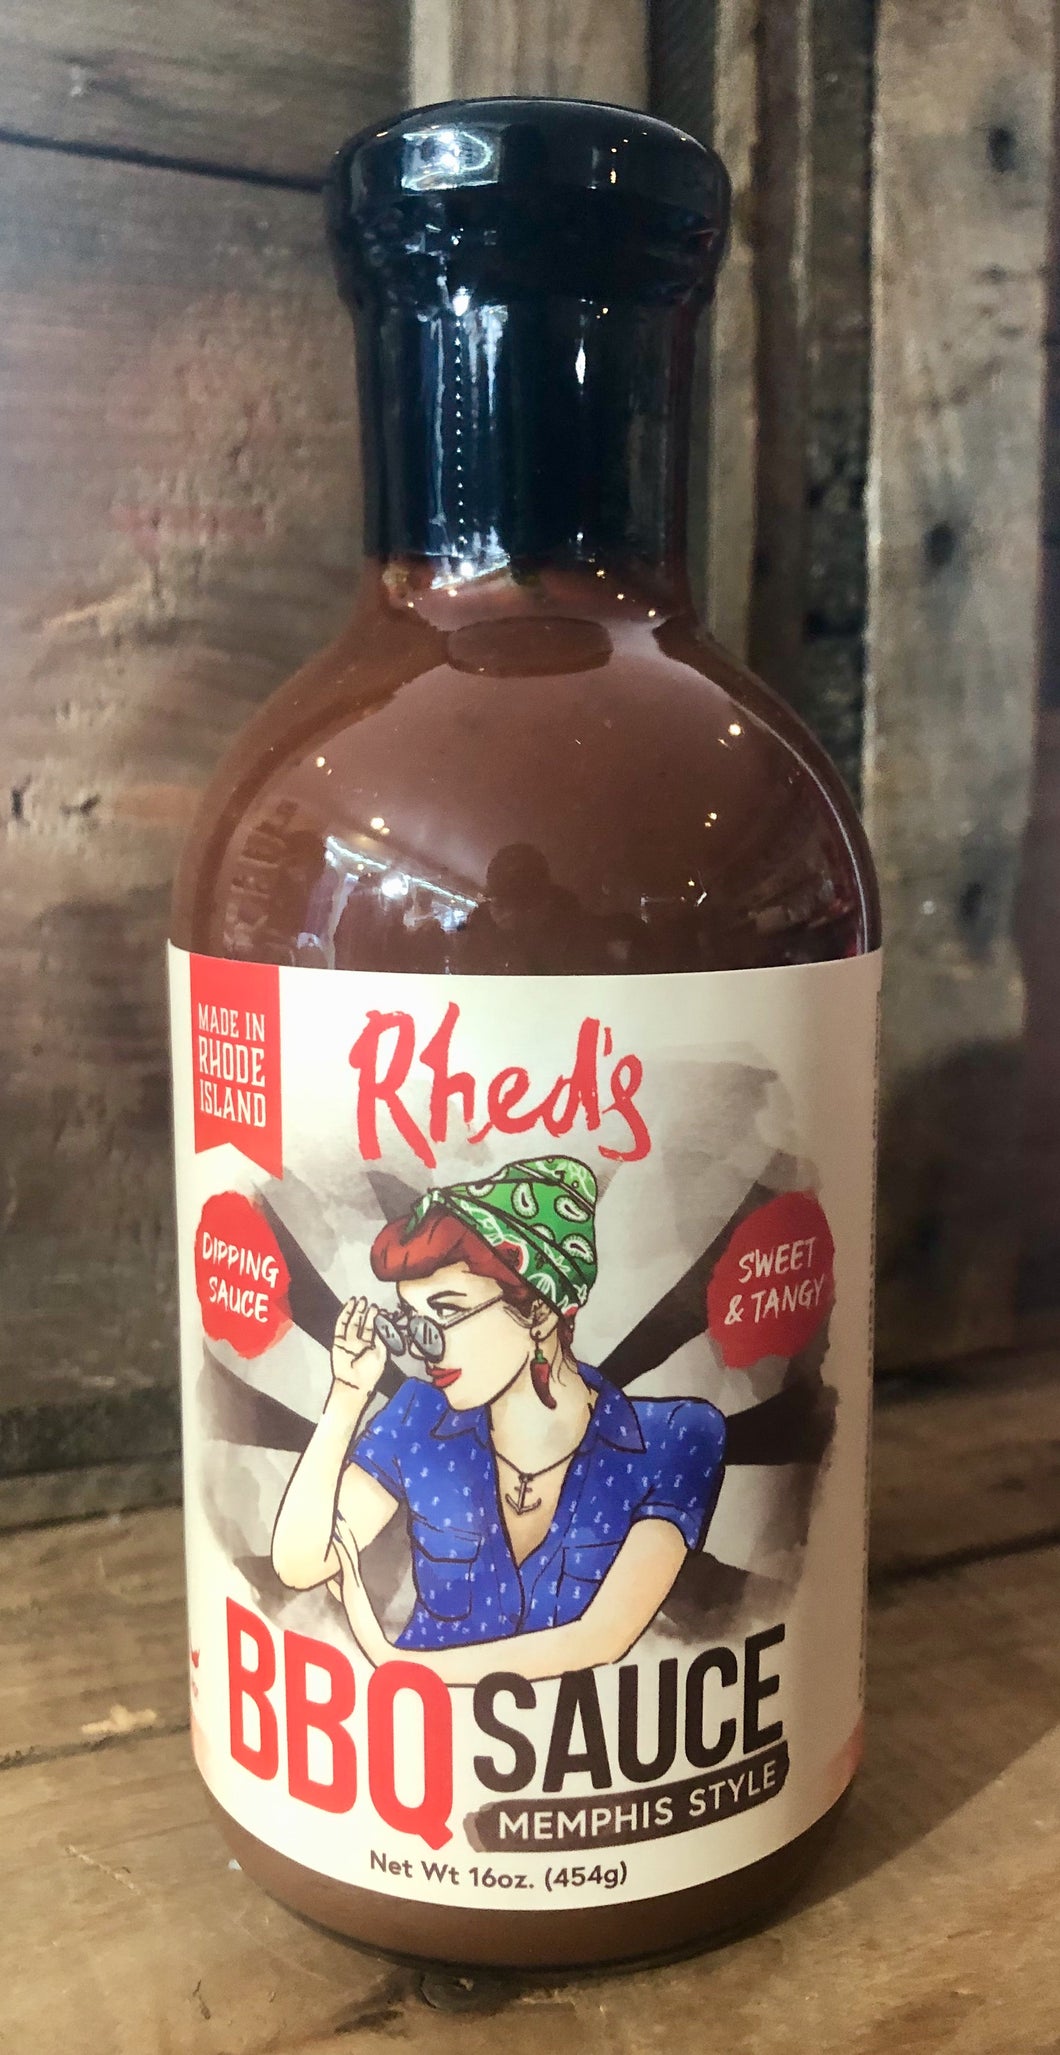 Rhed’s BBQ Sauce, Memphis Style